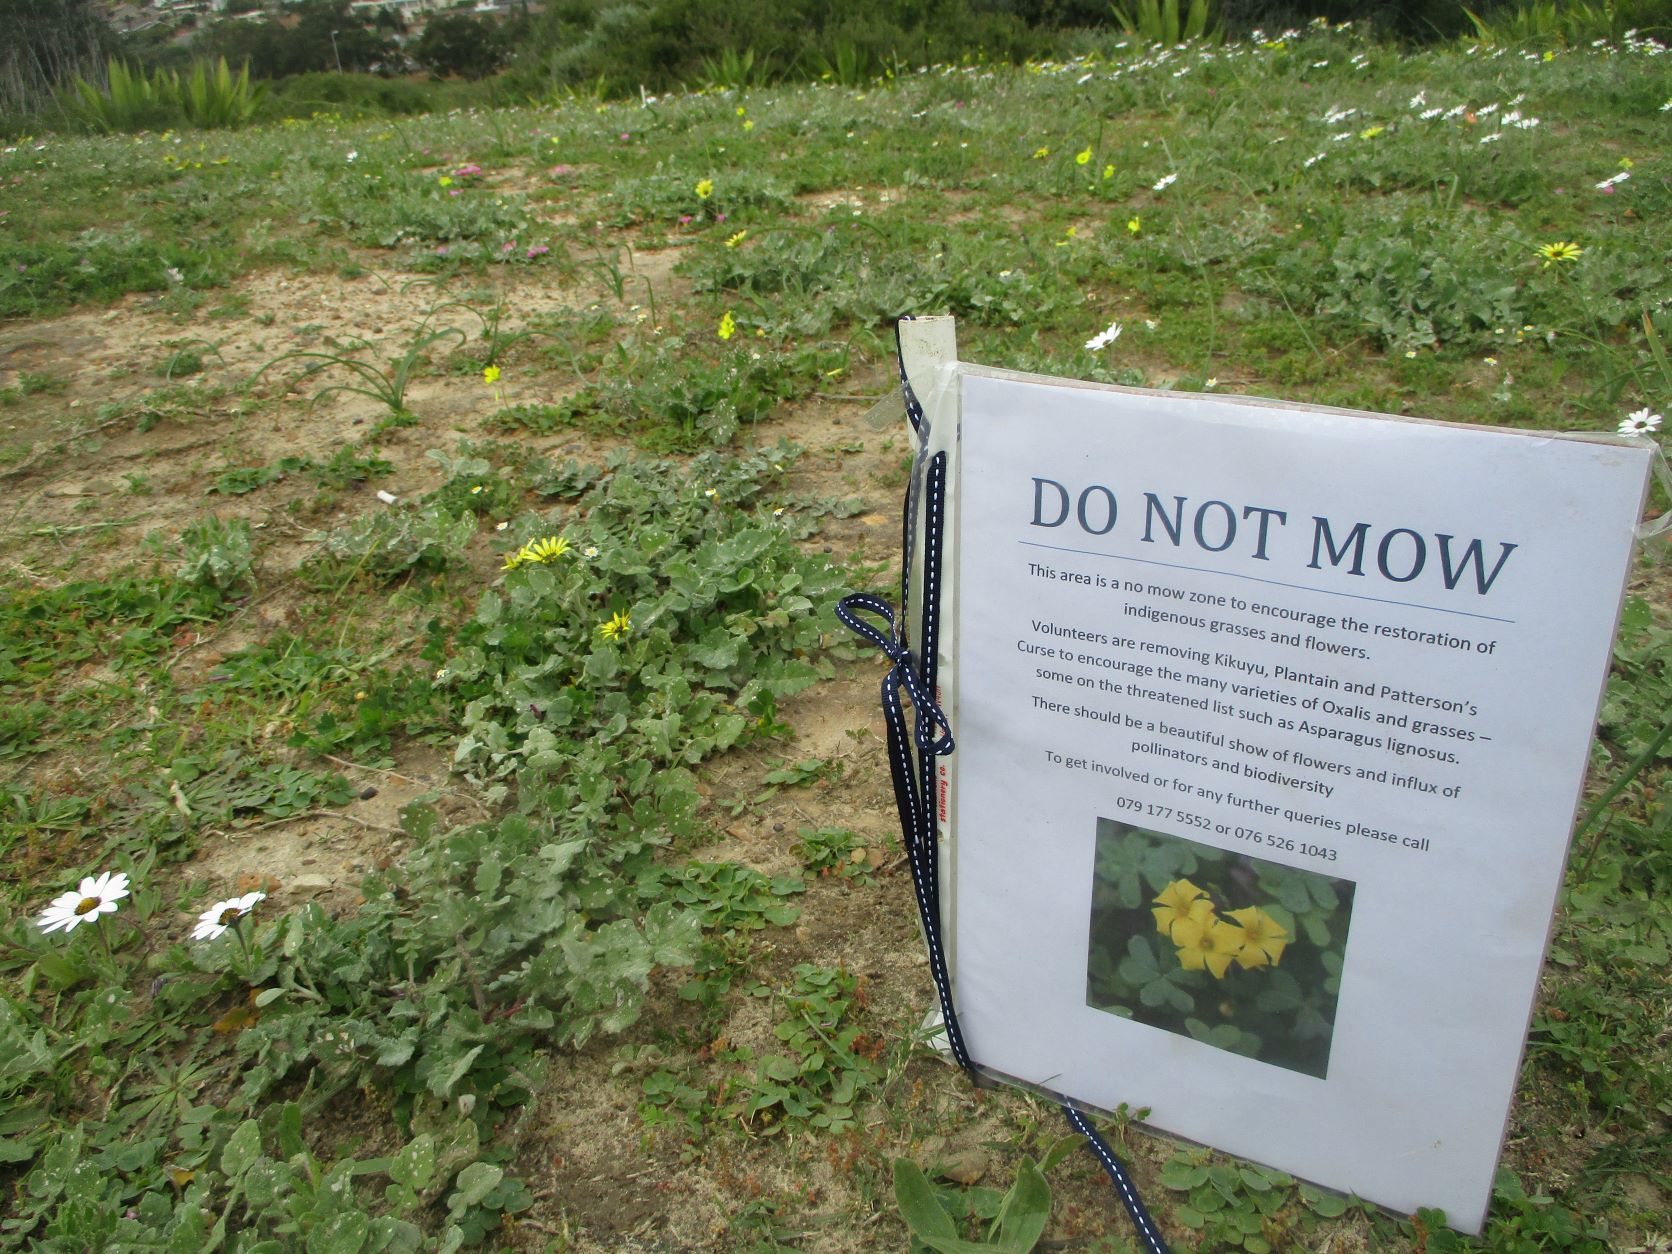 Informing the city mowers and educating others is essential